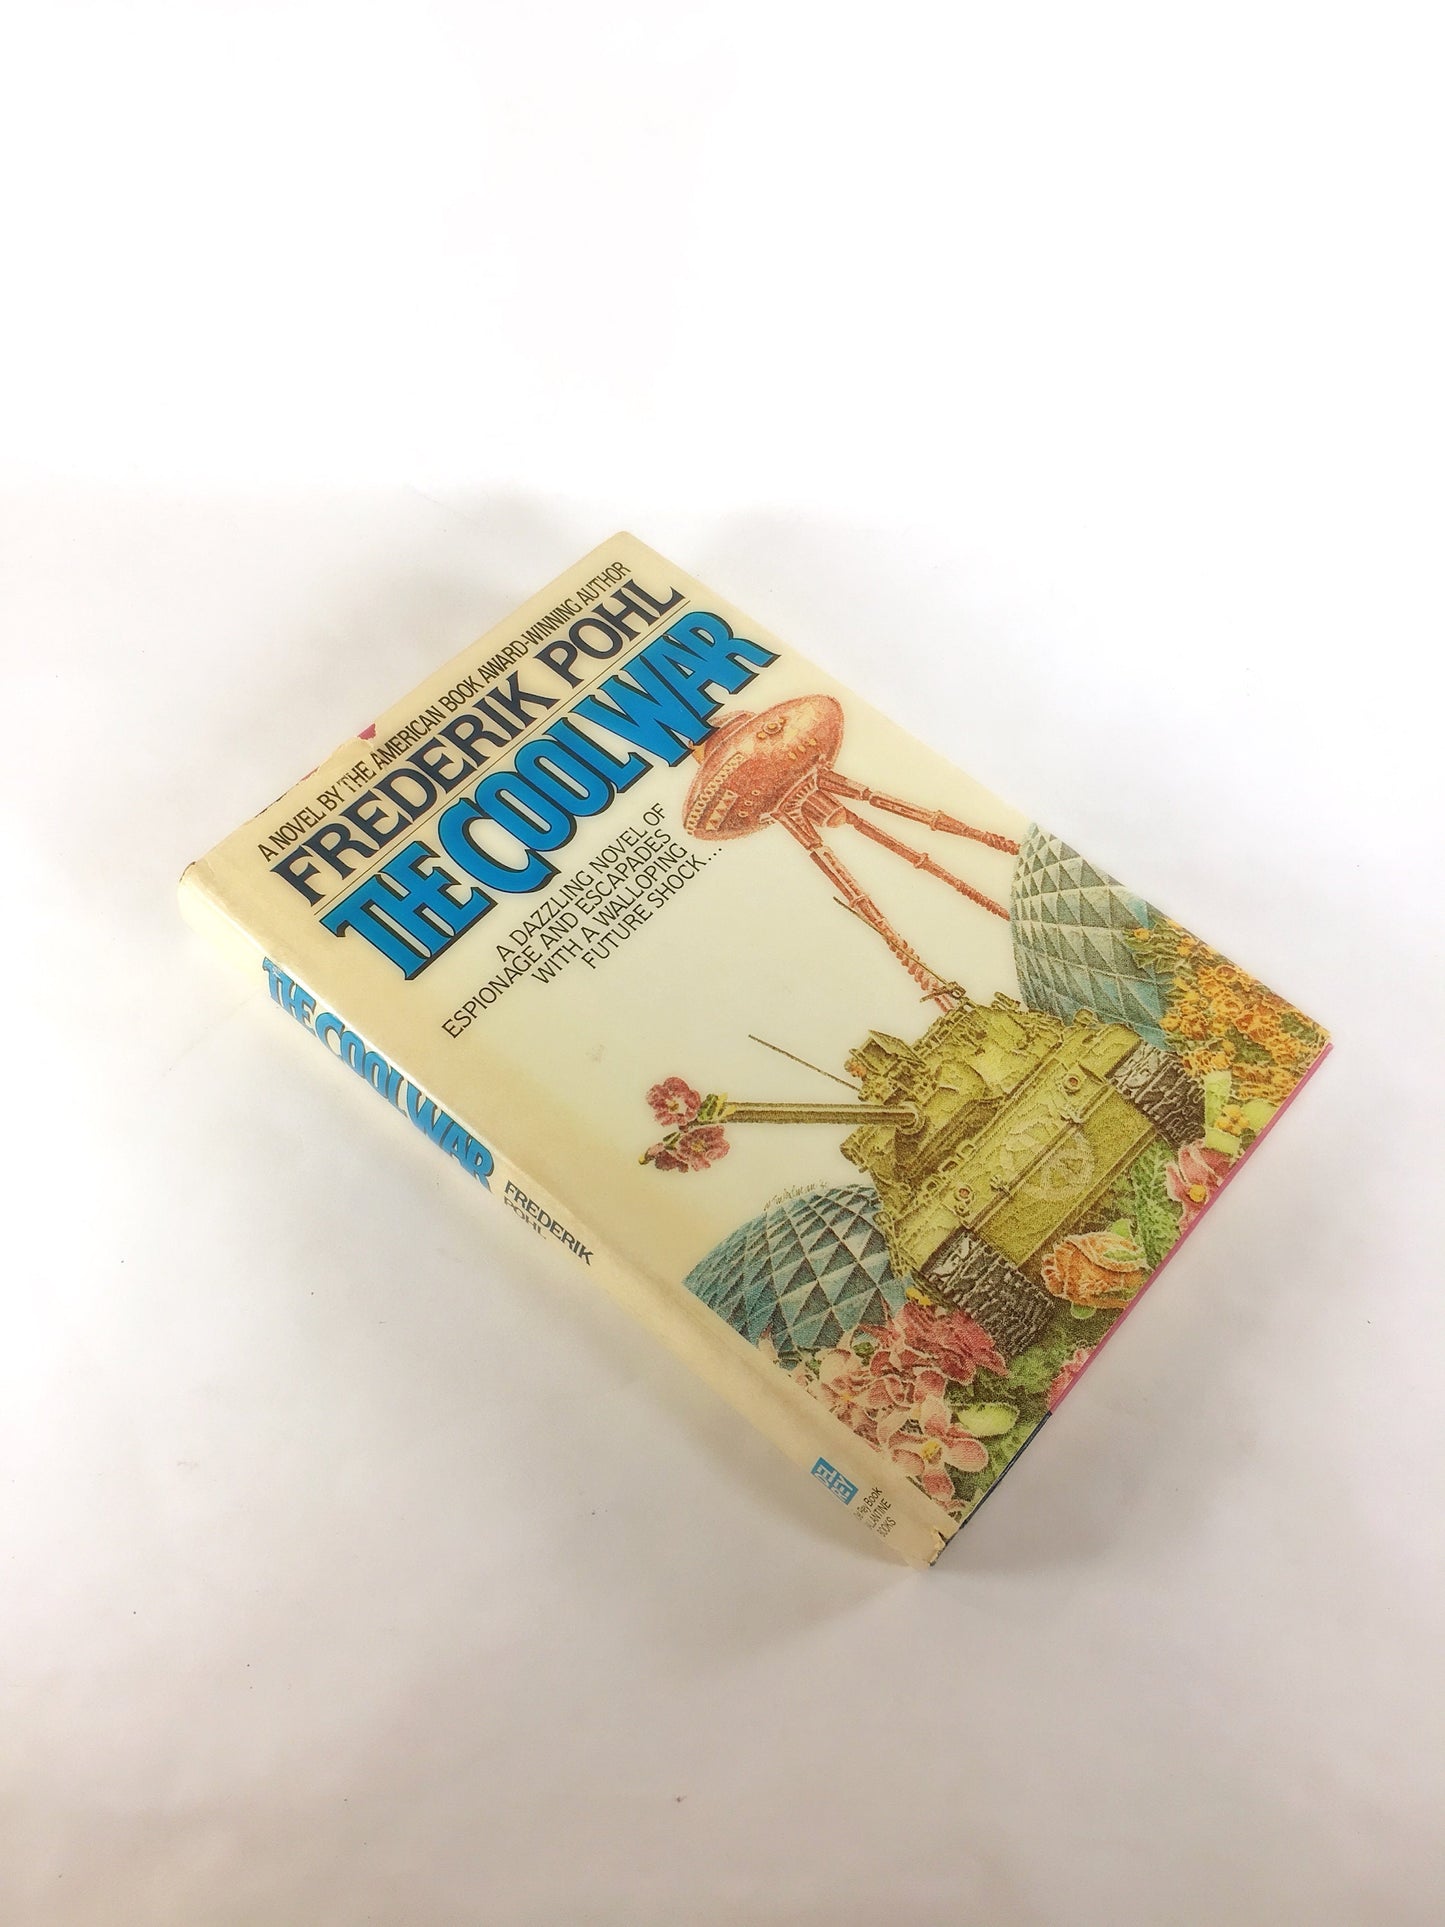 Cool War by Frederik Pohl circa 1981. Vintage science fiction book about spies between rival nations. Gripping story of intrigue & suspense